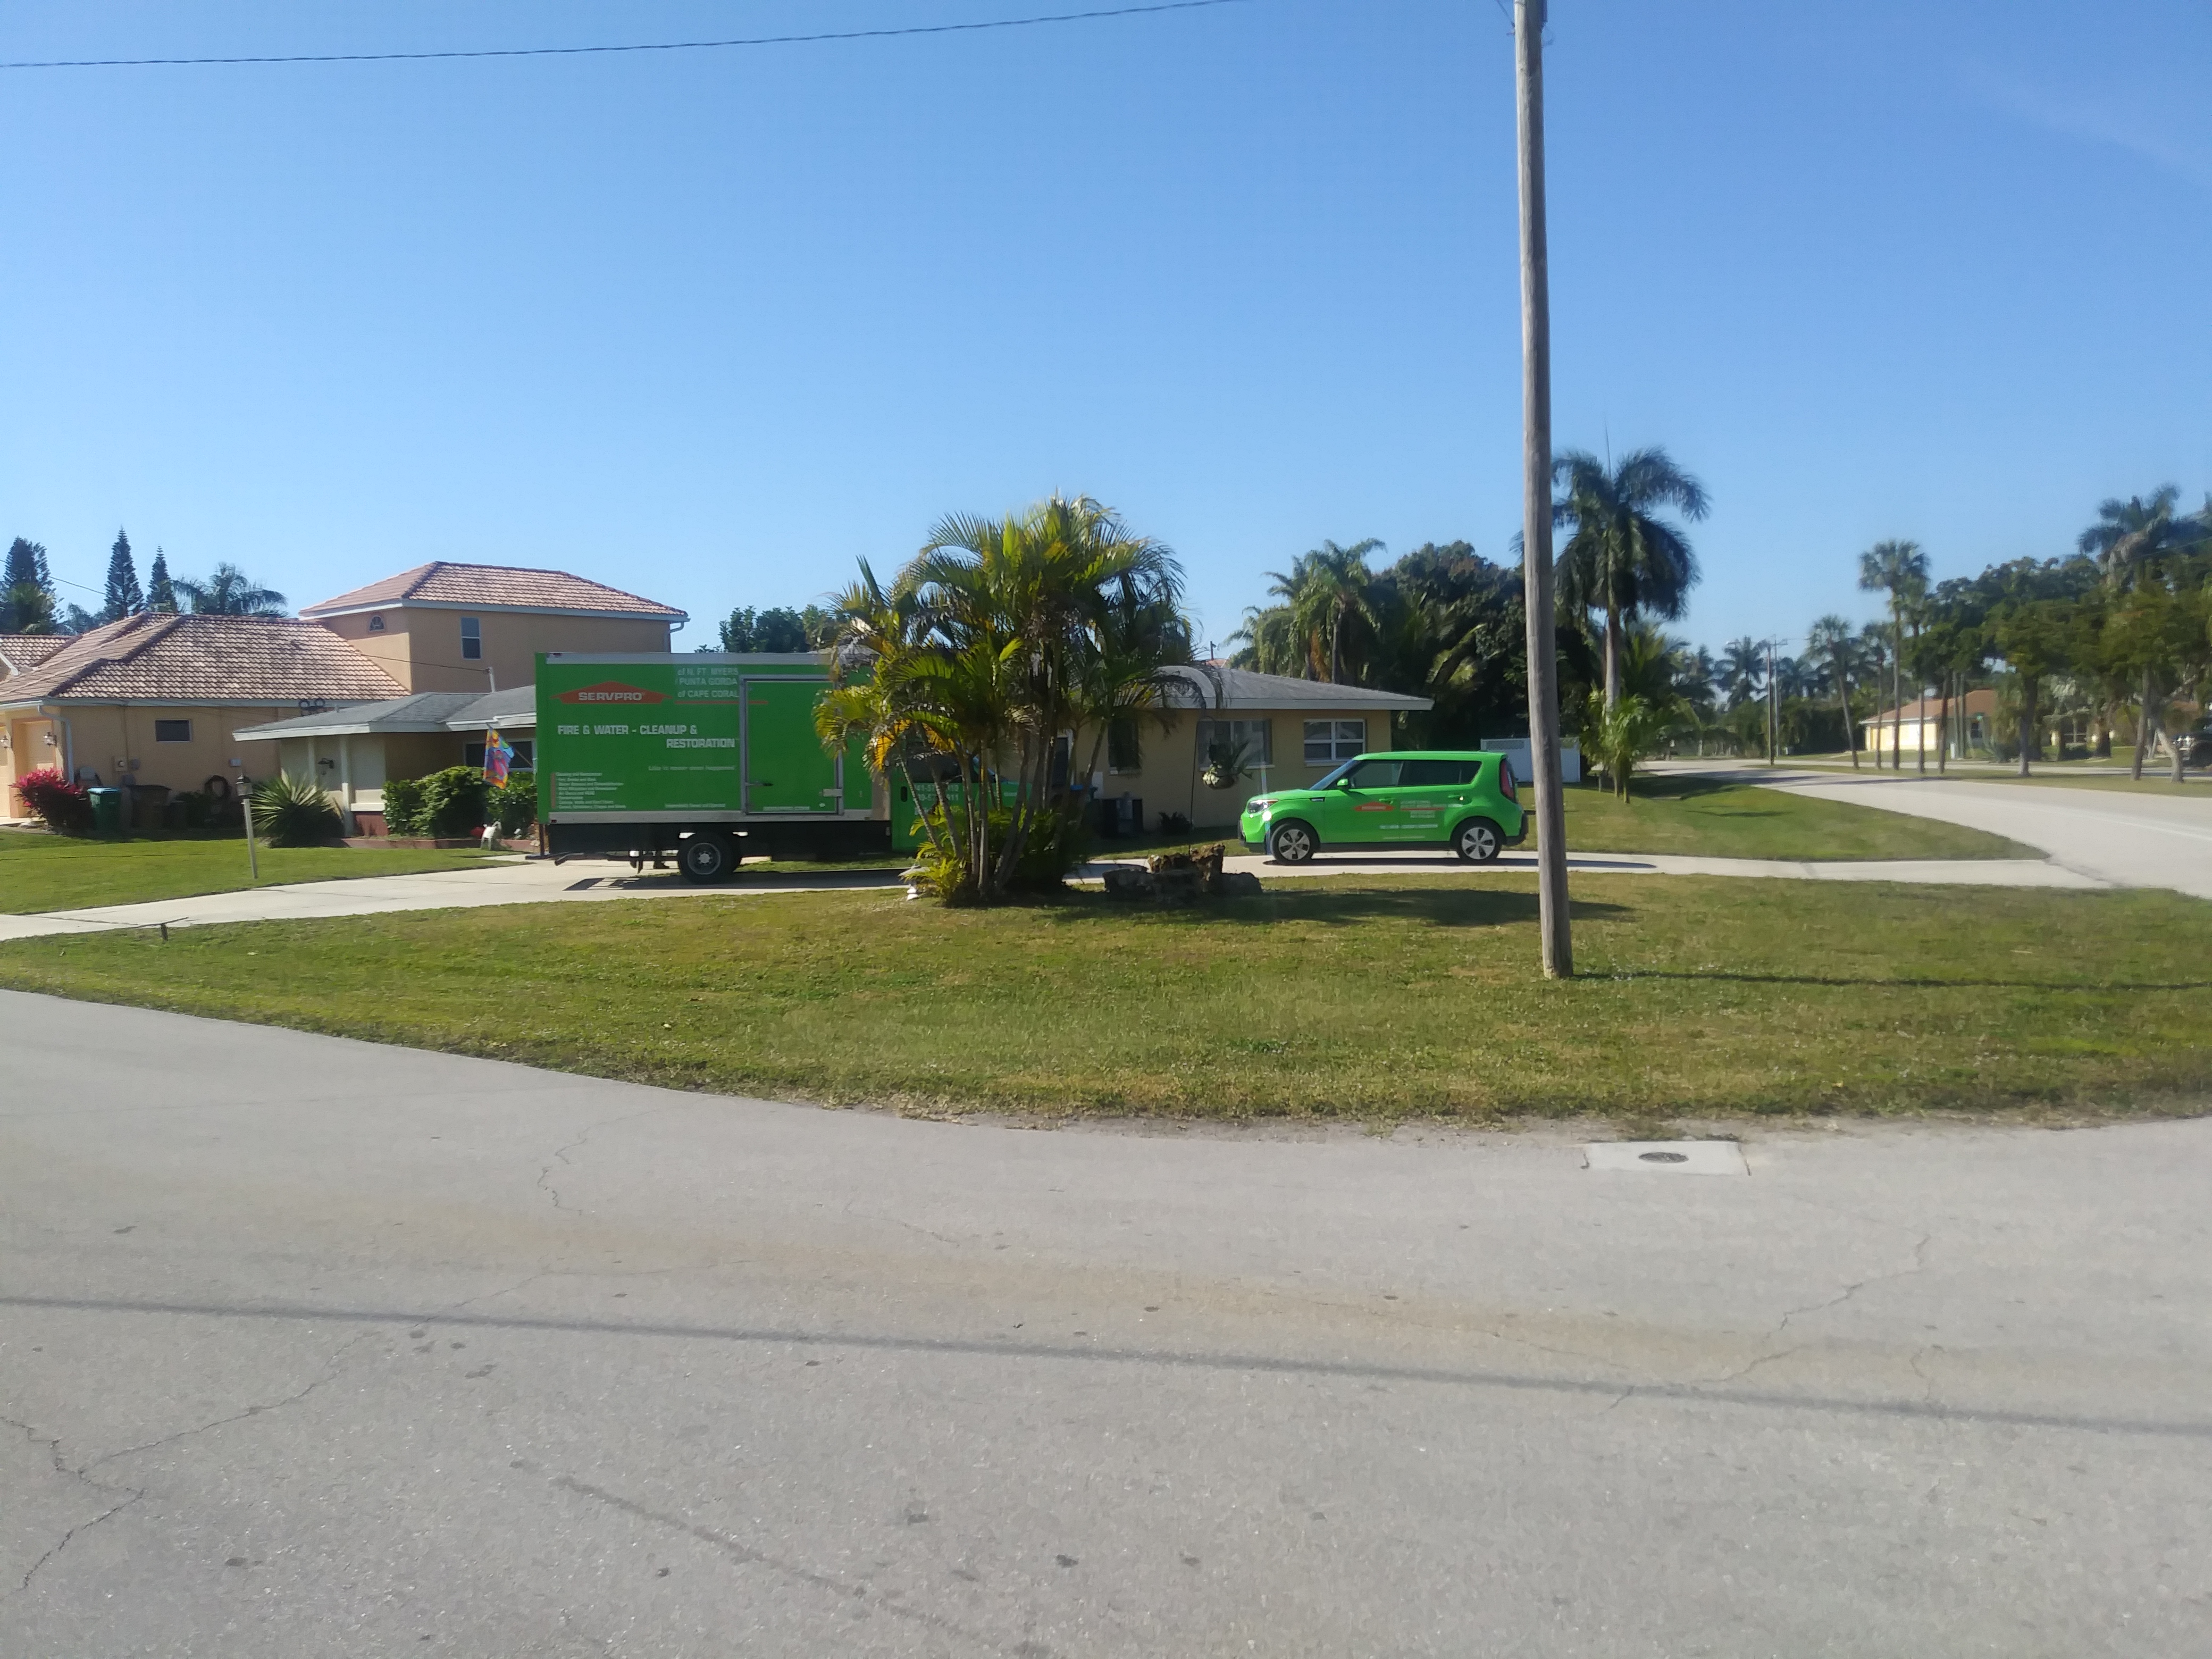 SERVPRO of Cape Coral is here to respond to all of your restoration needs in the Cape Coral area 24/7/365.  Give us a call!